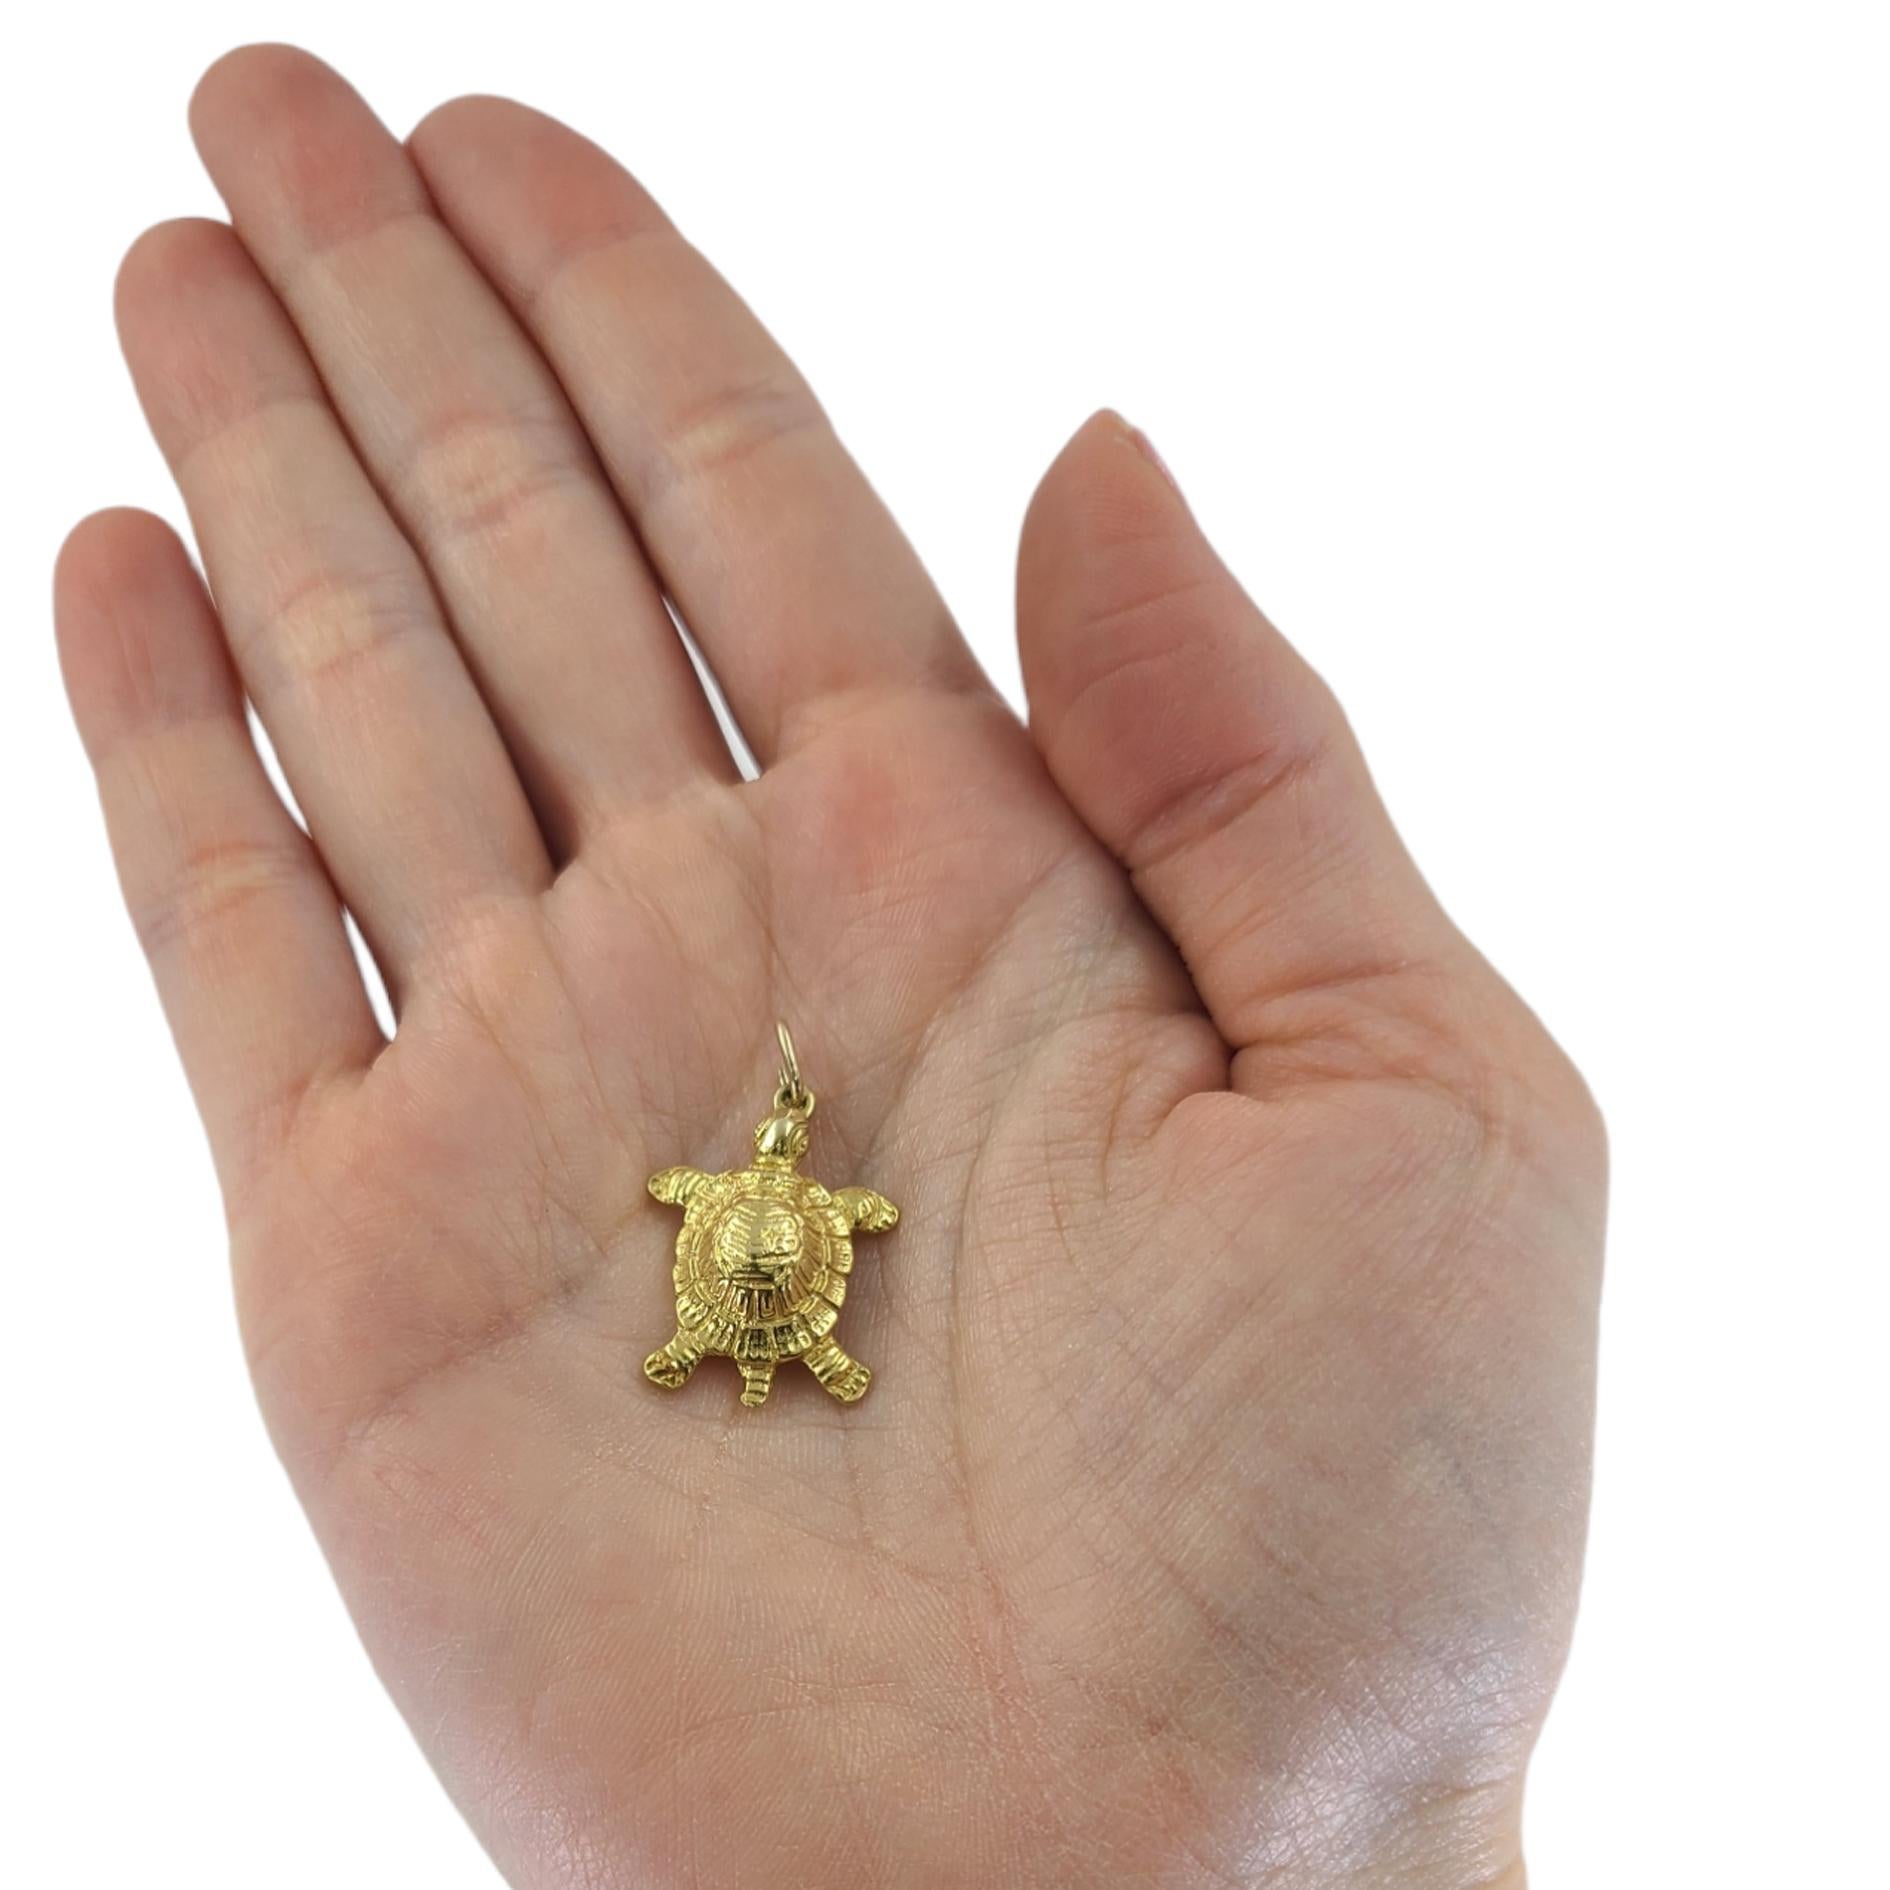 14 Karat Yellow Gold Turtle Charm Pendant With Textured Shell Measuring 1 Inch Long With Bale. Finished Weight Is 3.5 Grams. Bale Currently Cut Open; Will Solder Closed Upon Request.